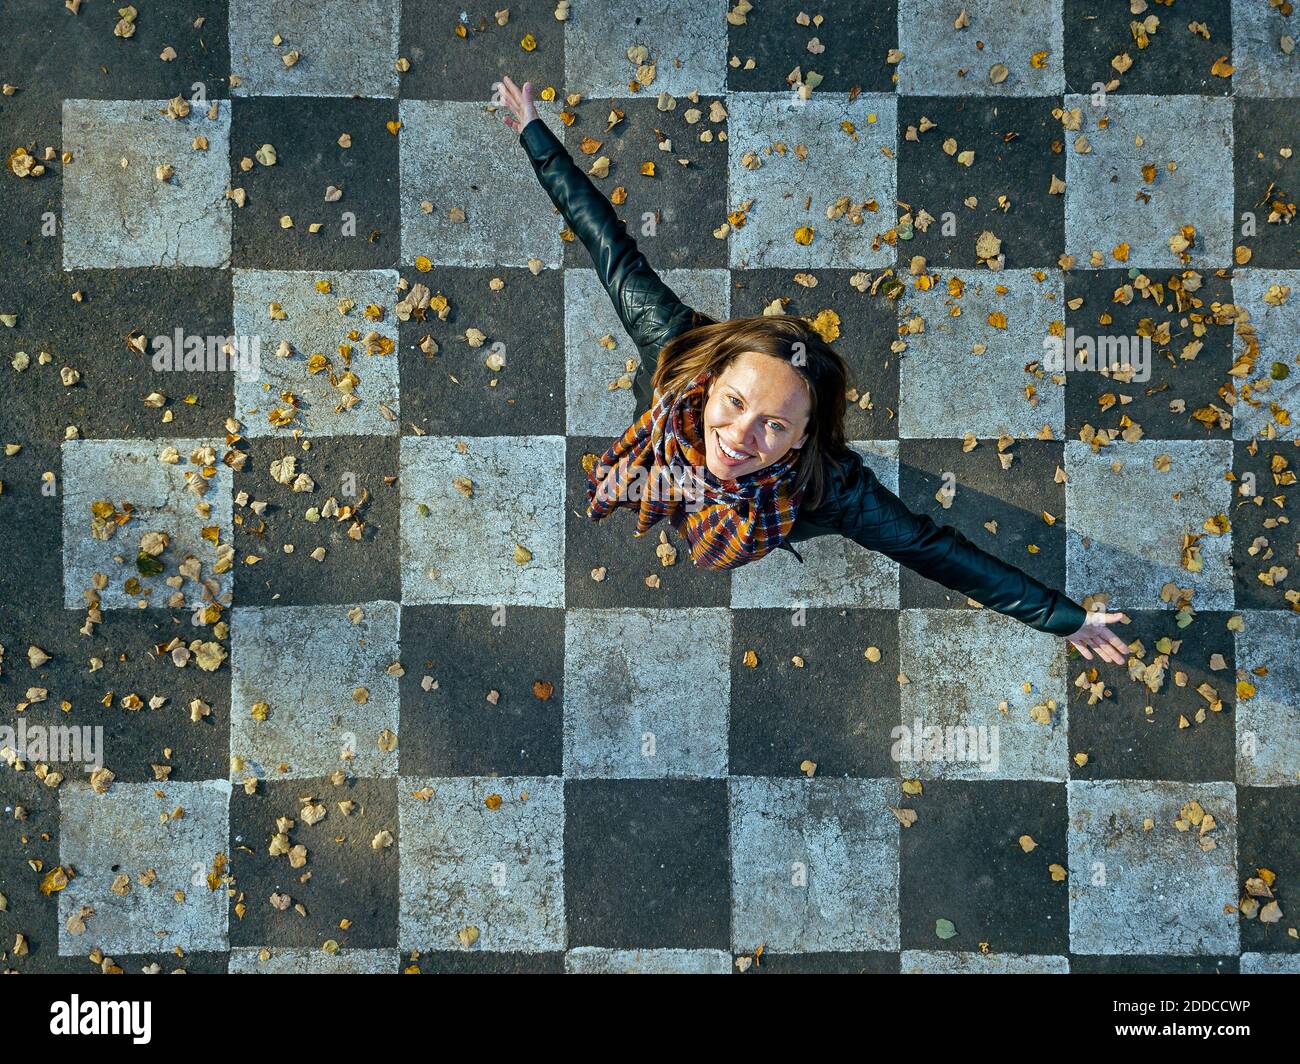 Smiling woman with arms outstretched spinning on asphalt painted with checked pattern Stock Photo